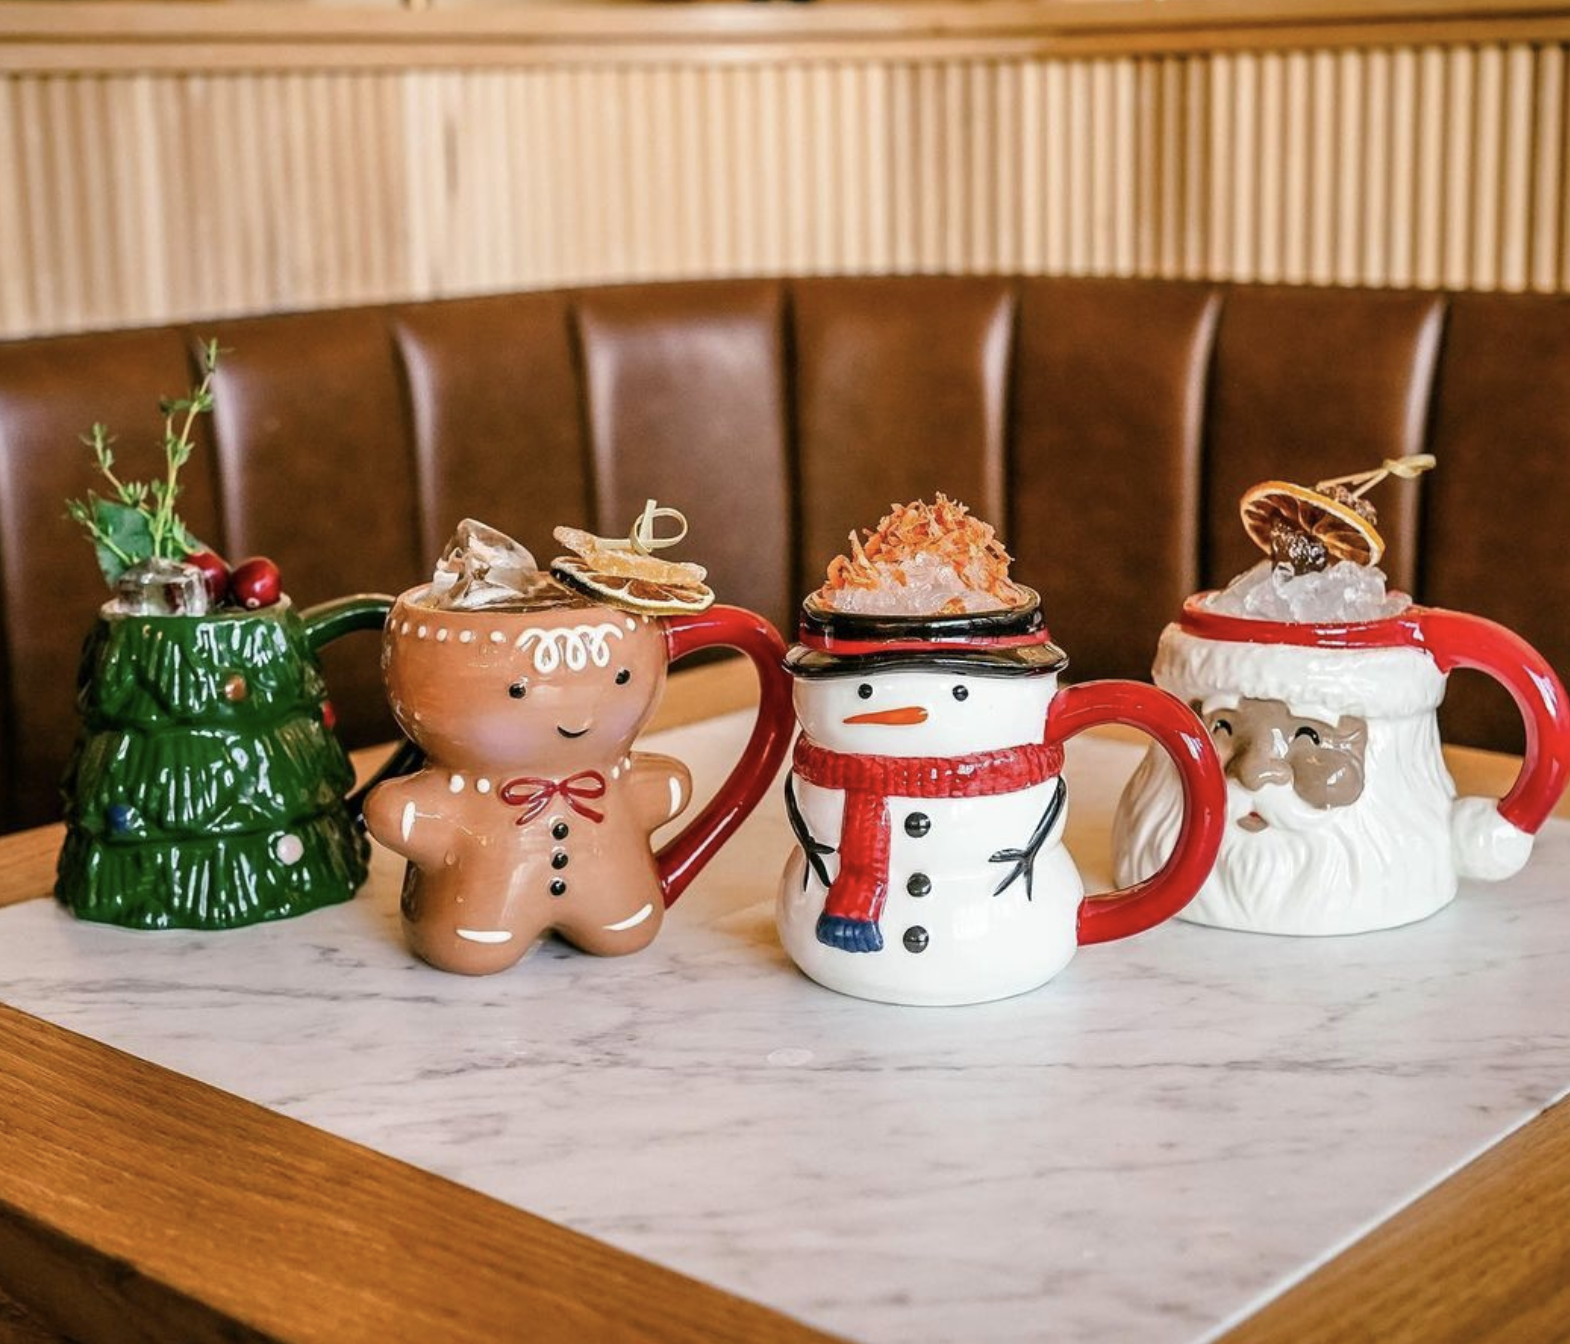 11 Festive Finds for the Holiday Season in New York